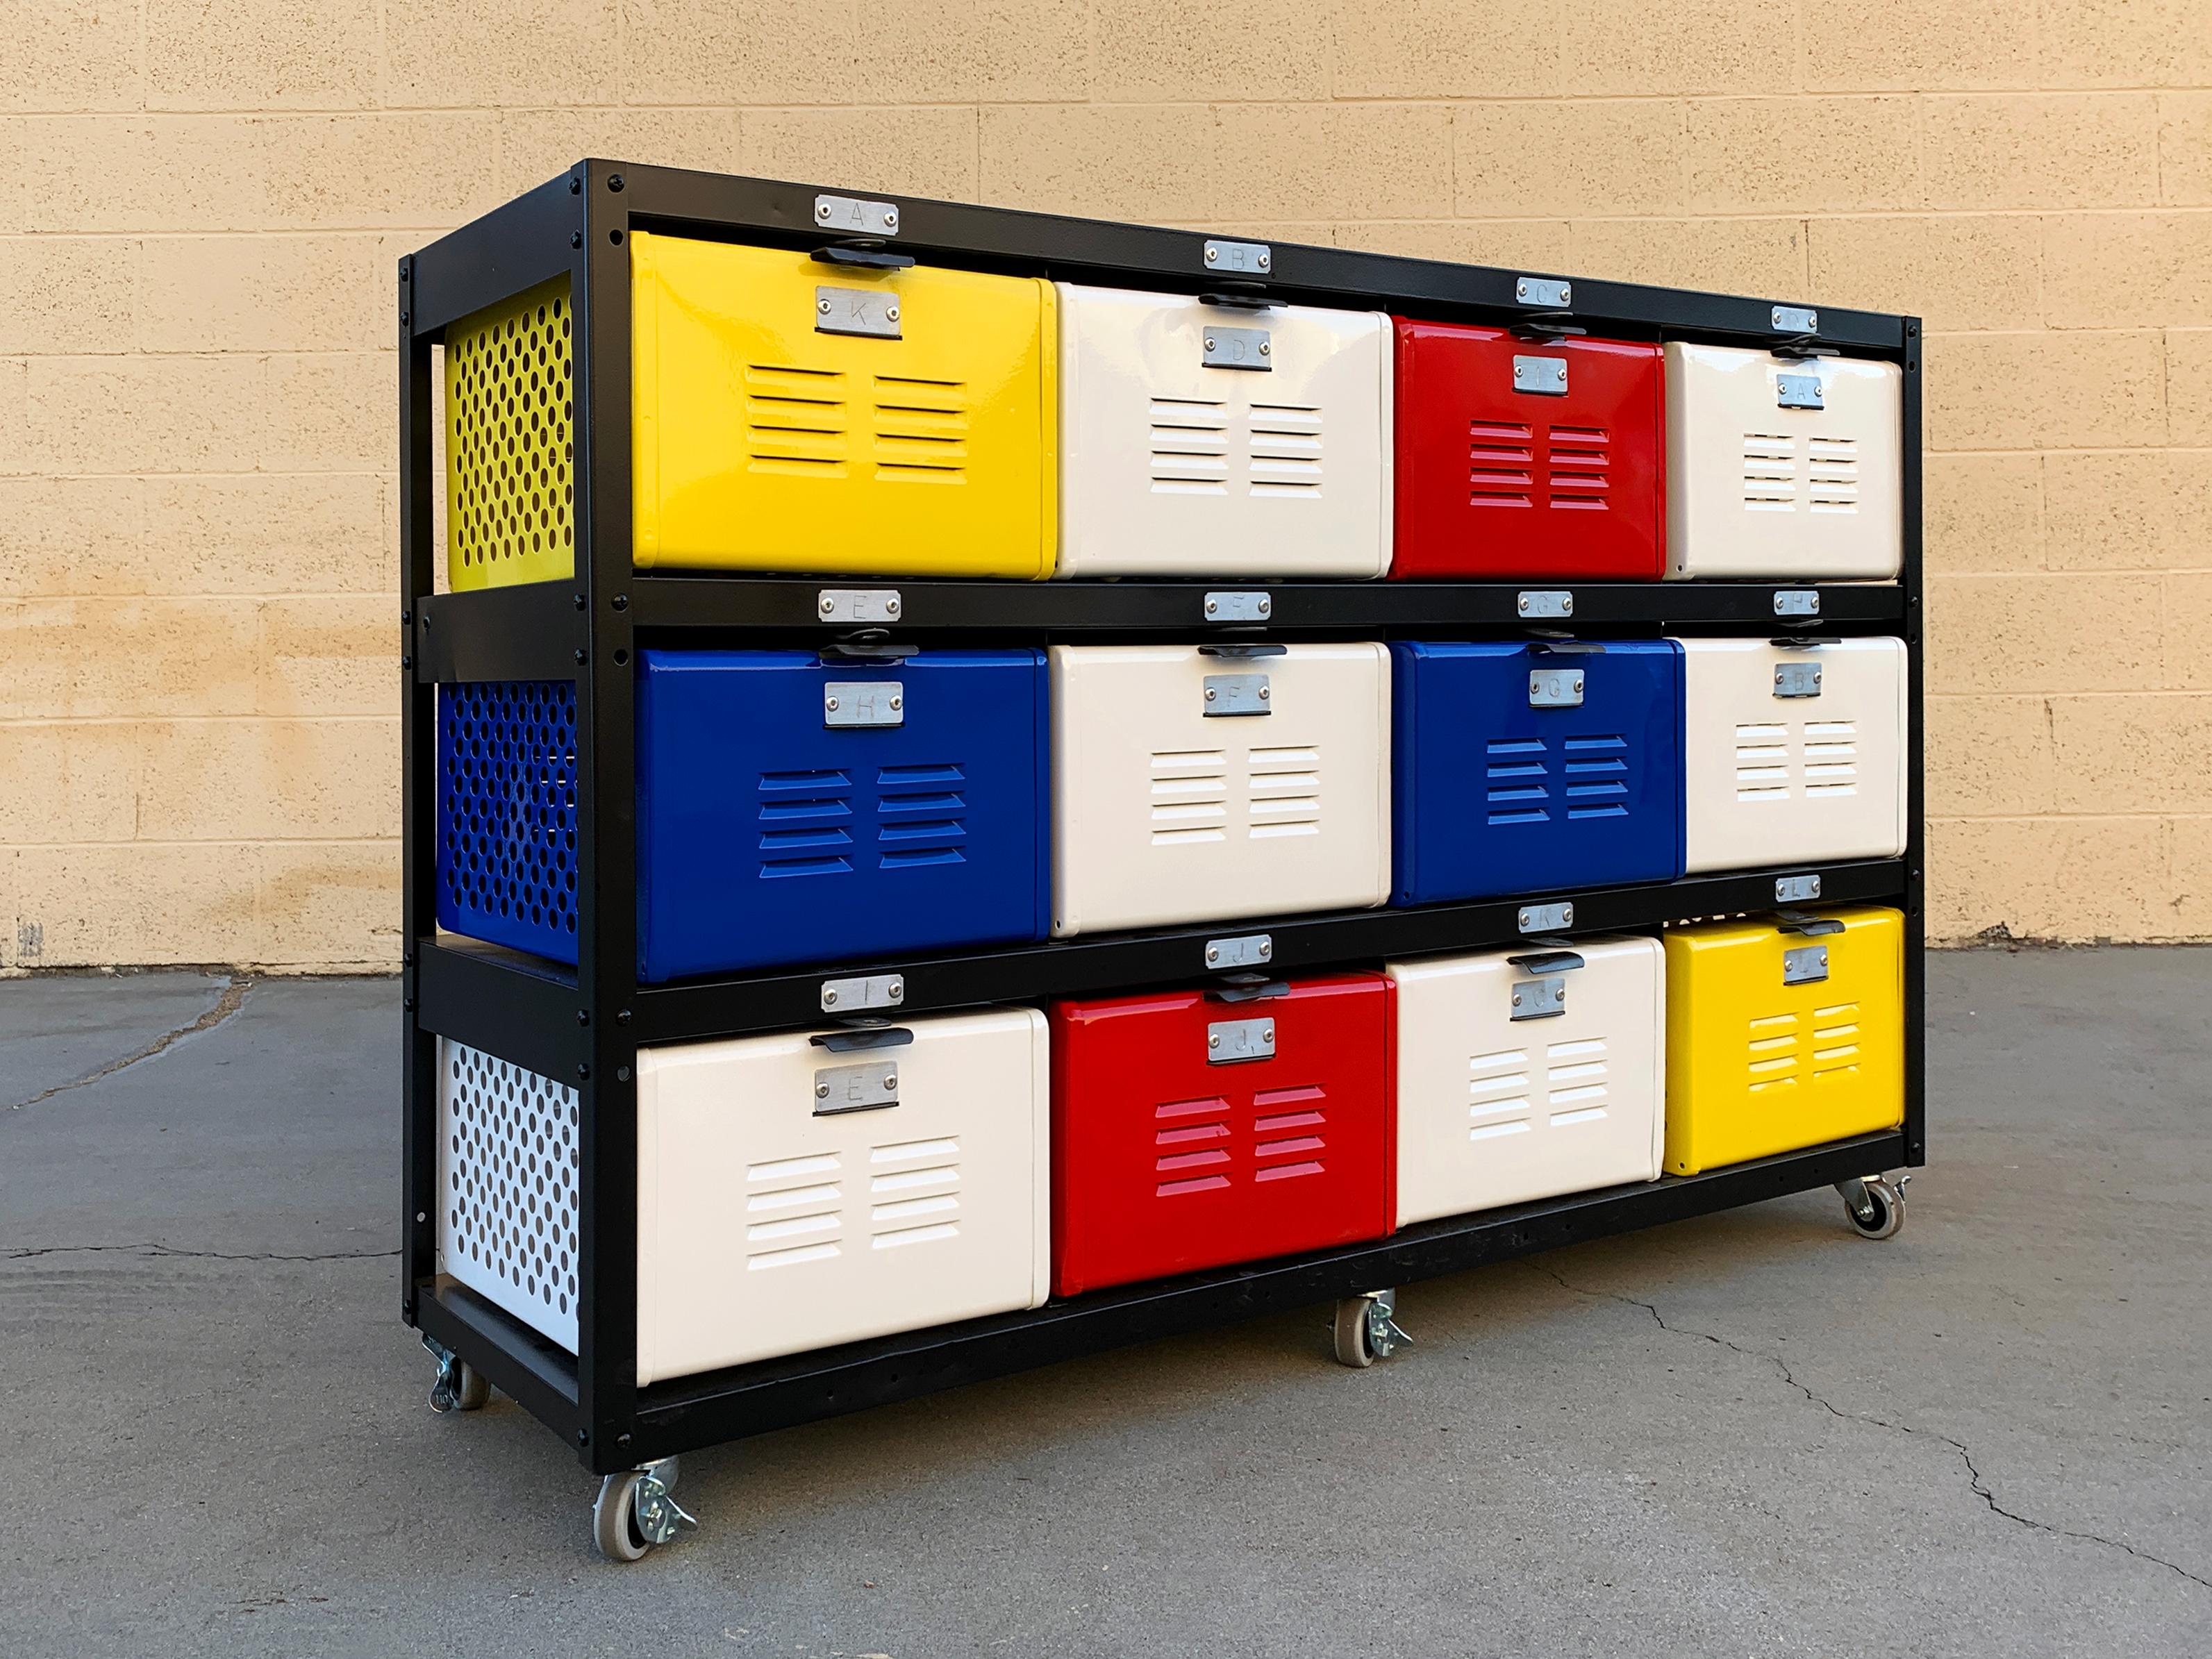 Return policy: This is a custom made piece. All sales final on custom orders and custom fabrications.

Custom made 4 x 3 locker basket unit featuring locking casters. Piet Mondrian color scheme!

Our all new, custom fabricated 4 wide x 3 high